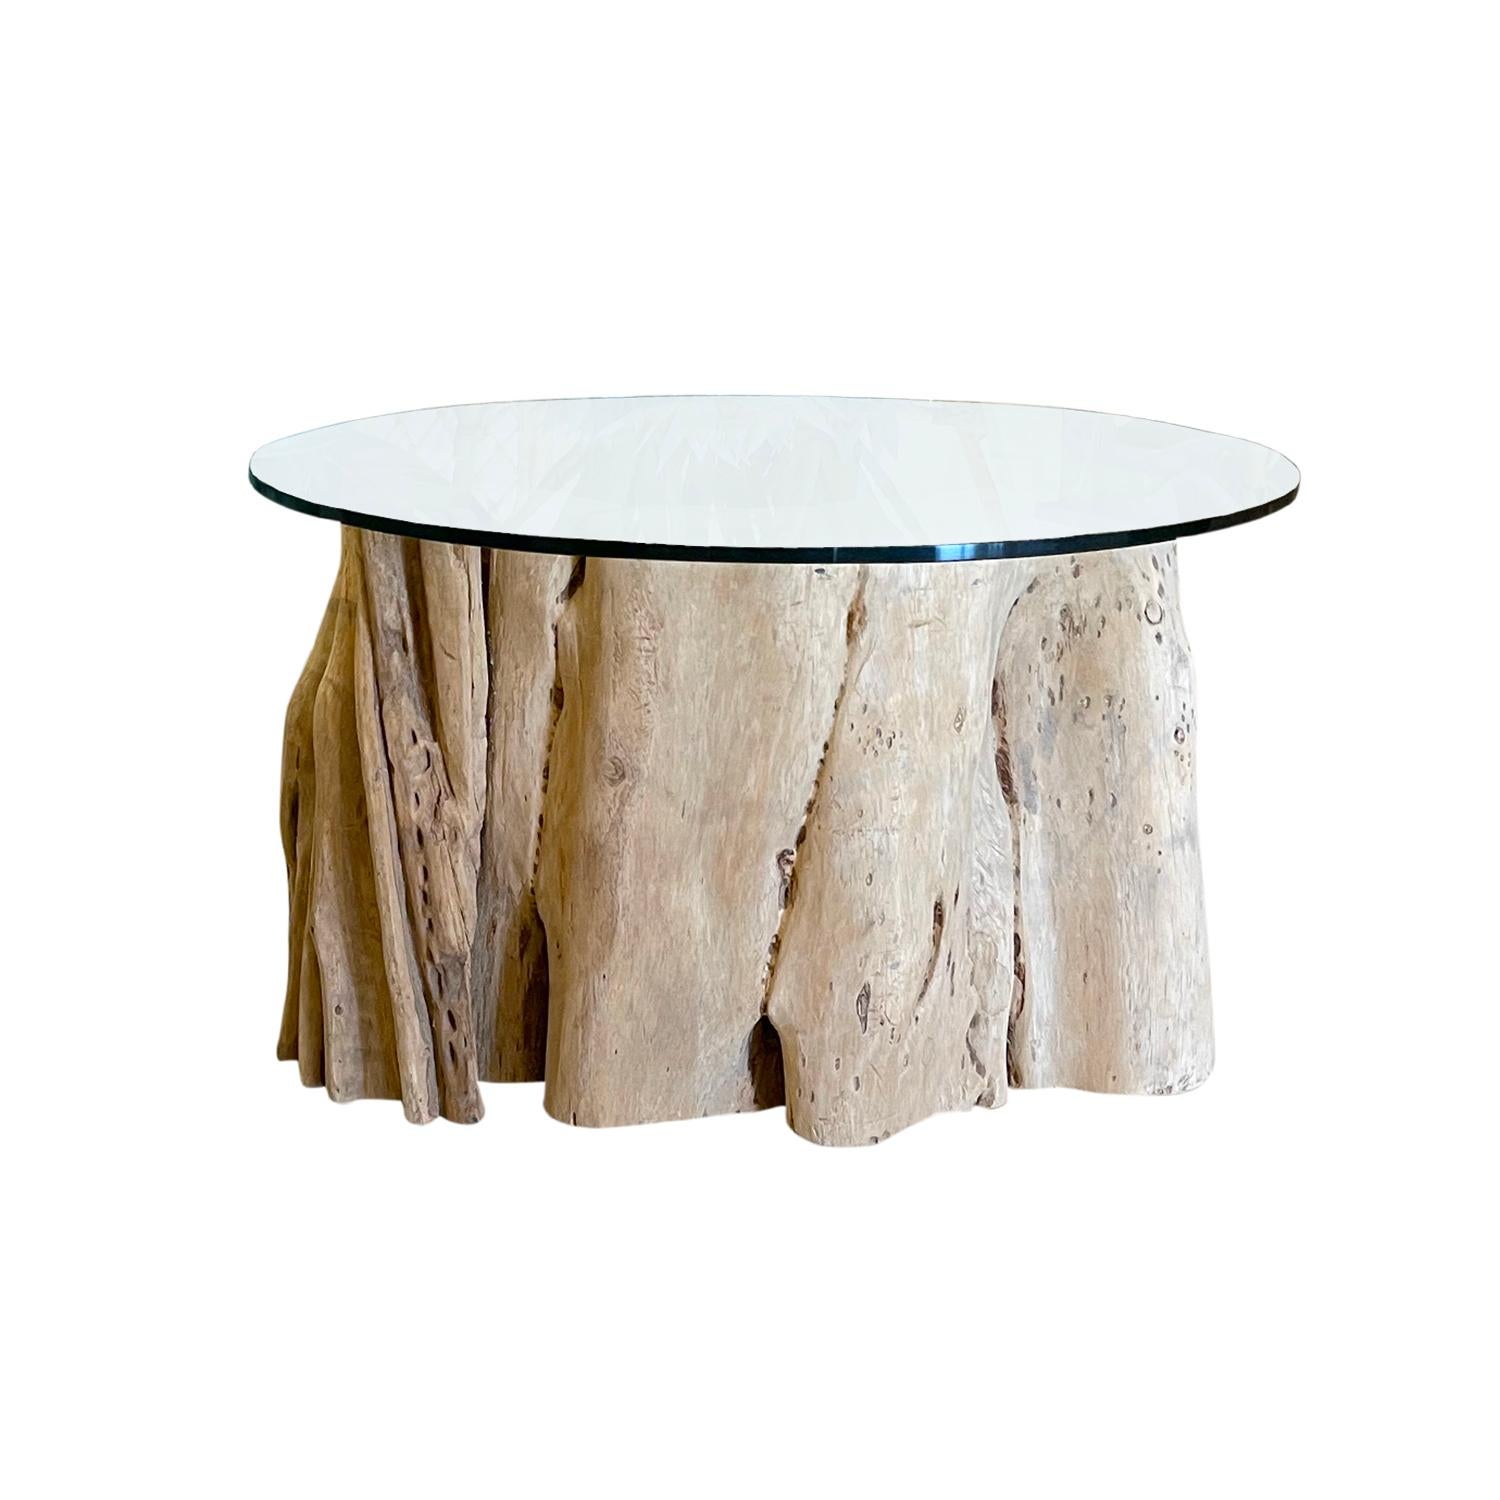 A similar Belgian set of monkey coffee tables made of hand crafted wood, in good condition. The sofa, side tables are composed with a round clear glass top. Natural root base sizes and design vary. 21st Century Belgium.